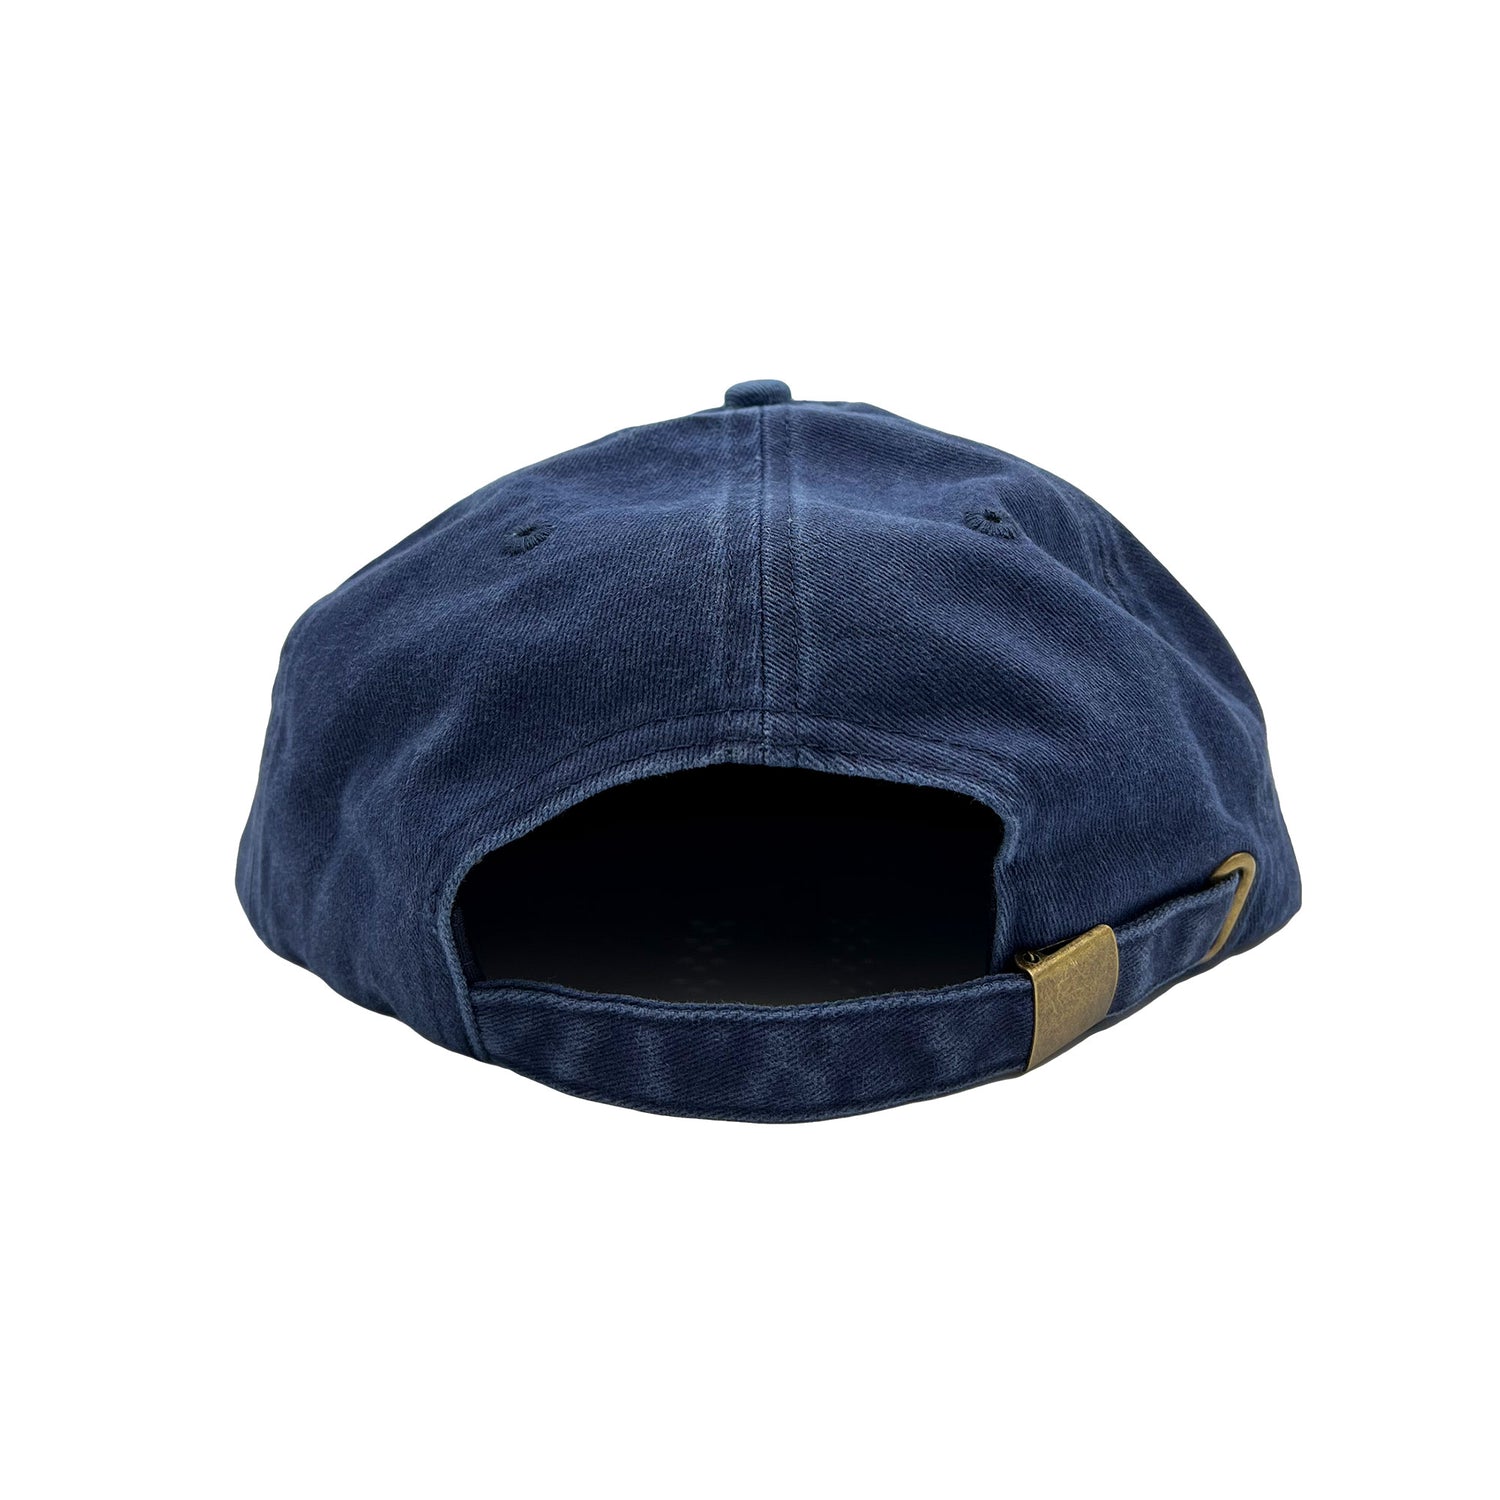 Free & Easy Washed Hat